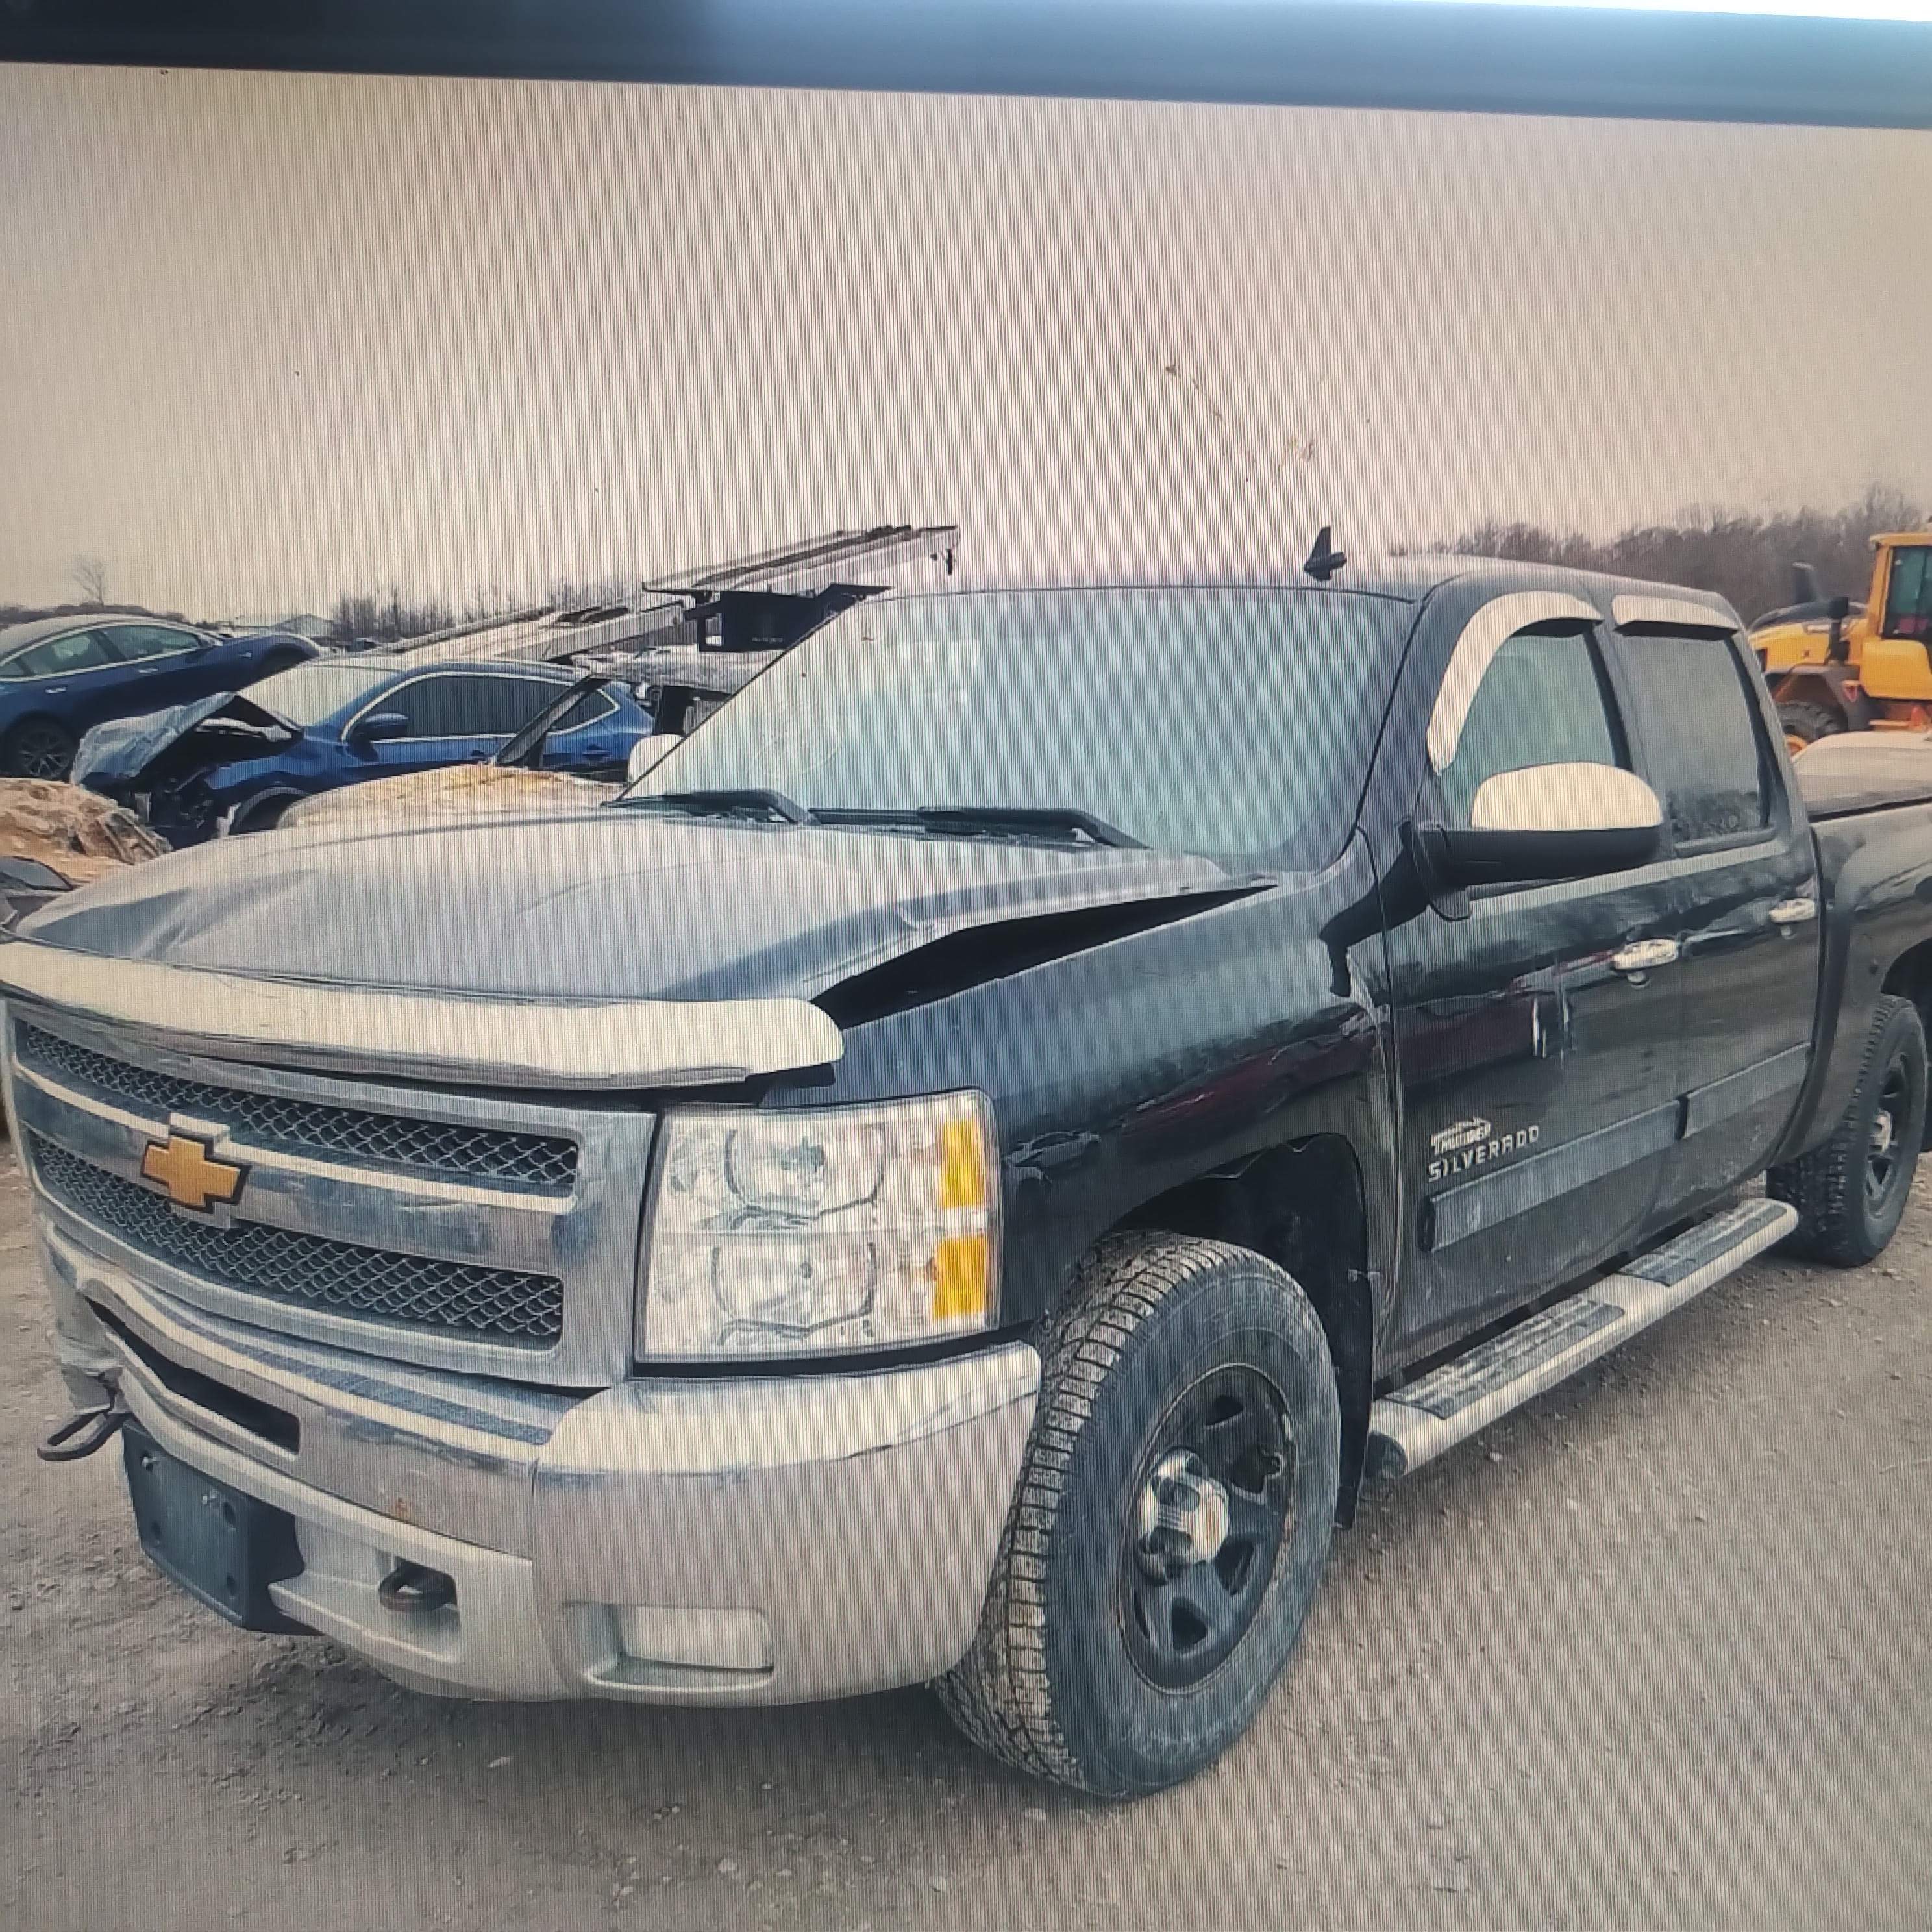 front driver's side of black 2012 Chevrolet Silverado pick up truck with damaged hood